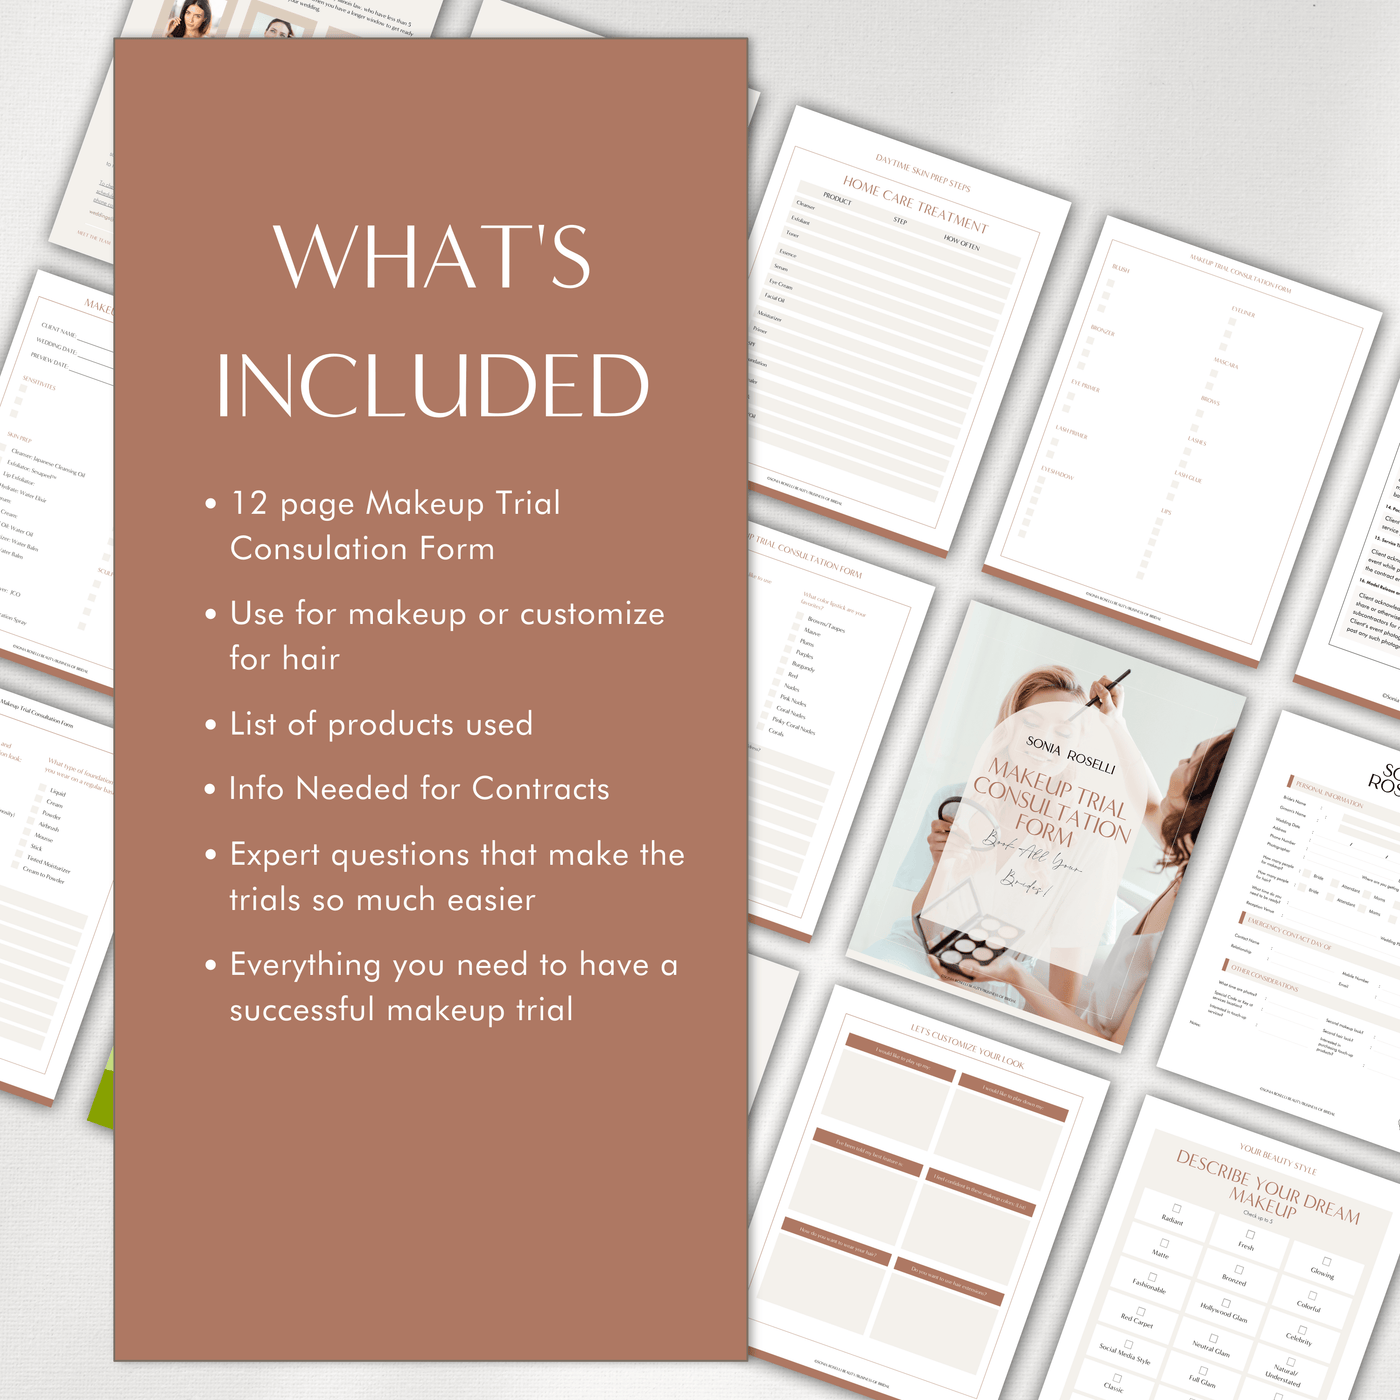 What's included: 12 page Makeup trial consultation form, use for makeup or customize for hair, list of products used, info for contracts, expert questions! 